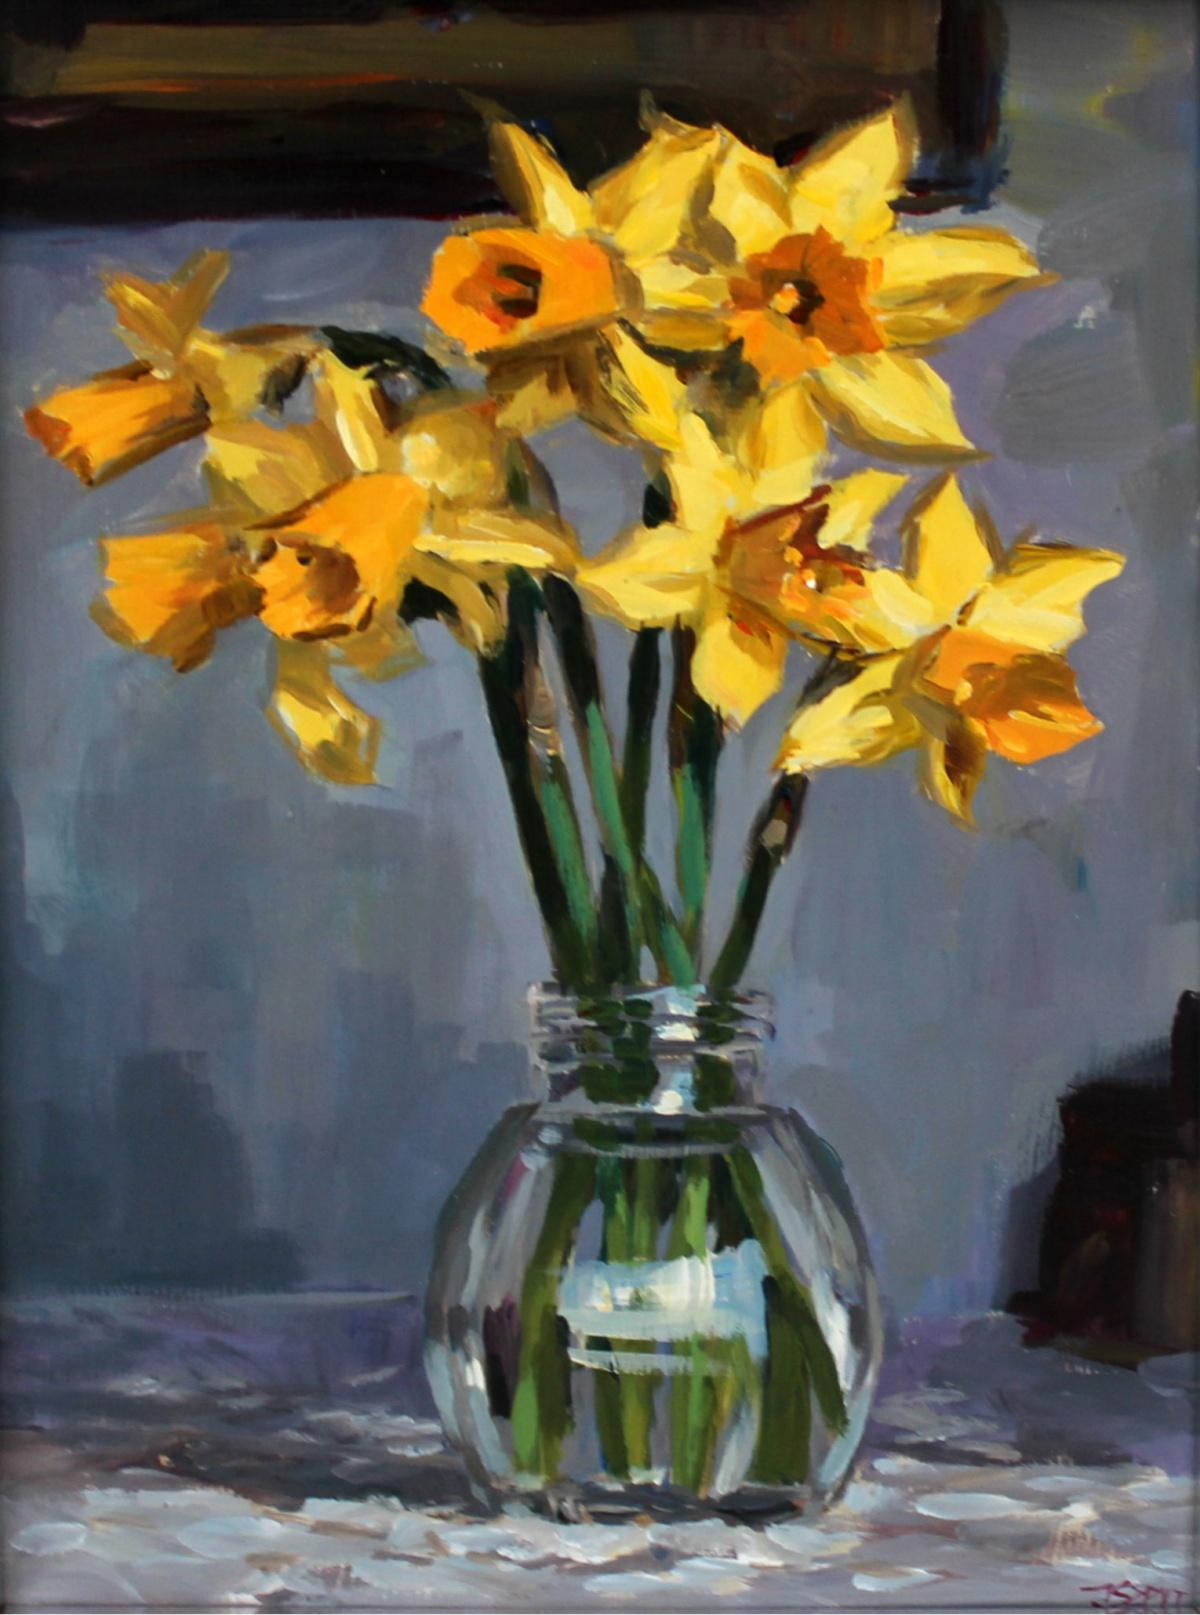 Narcissis - XXI Century, Contemporary Still Life Oil Painting, Realism, Floral